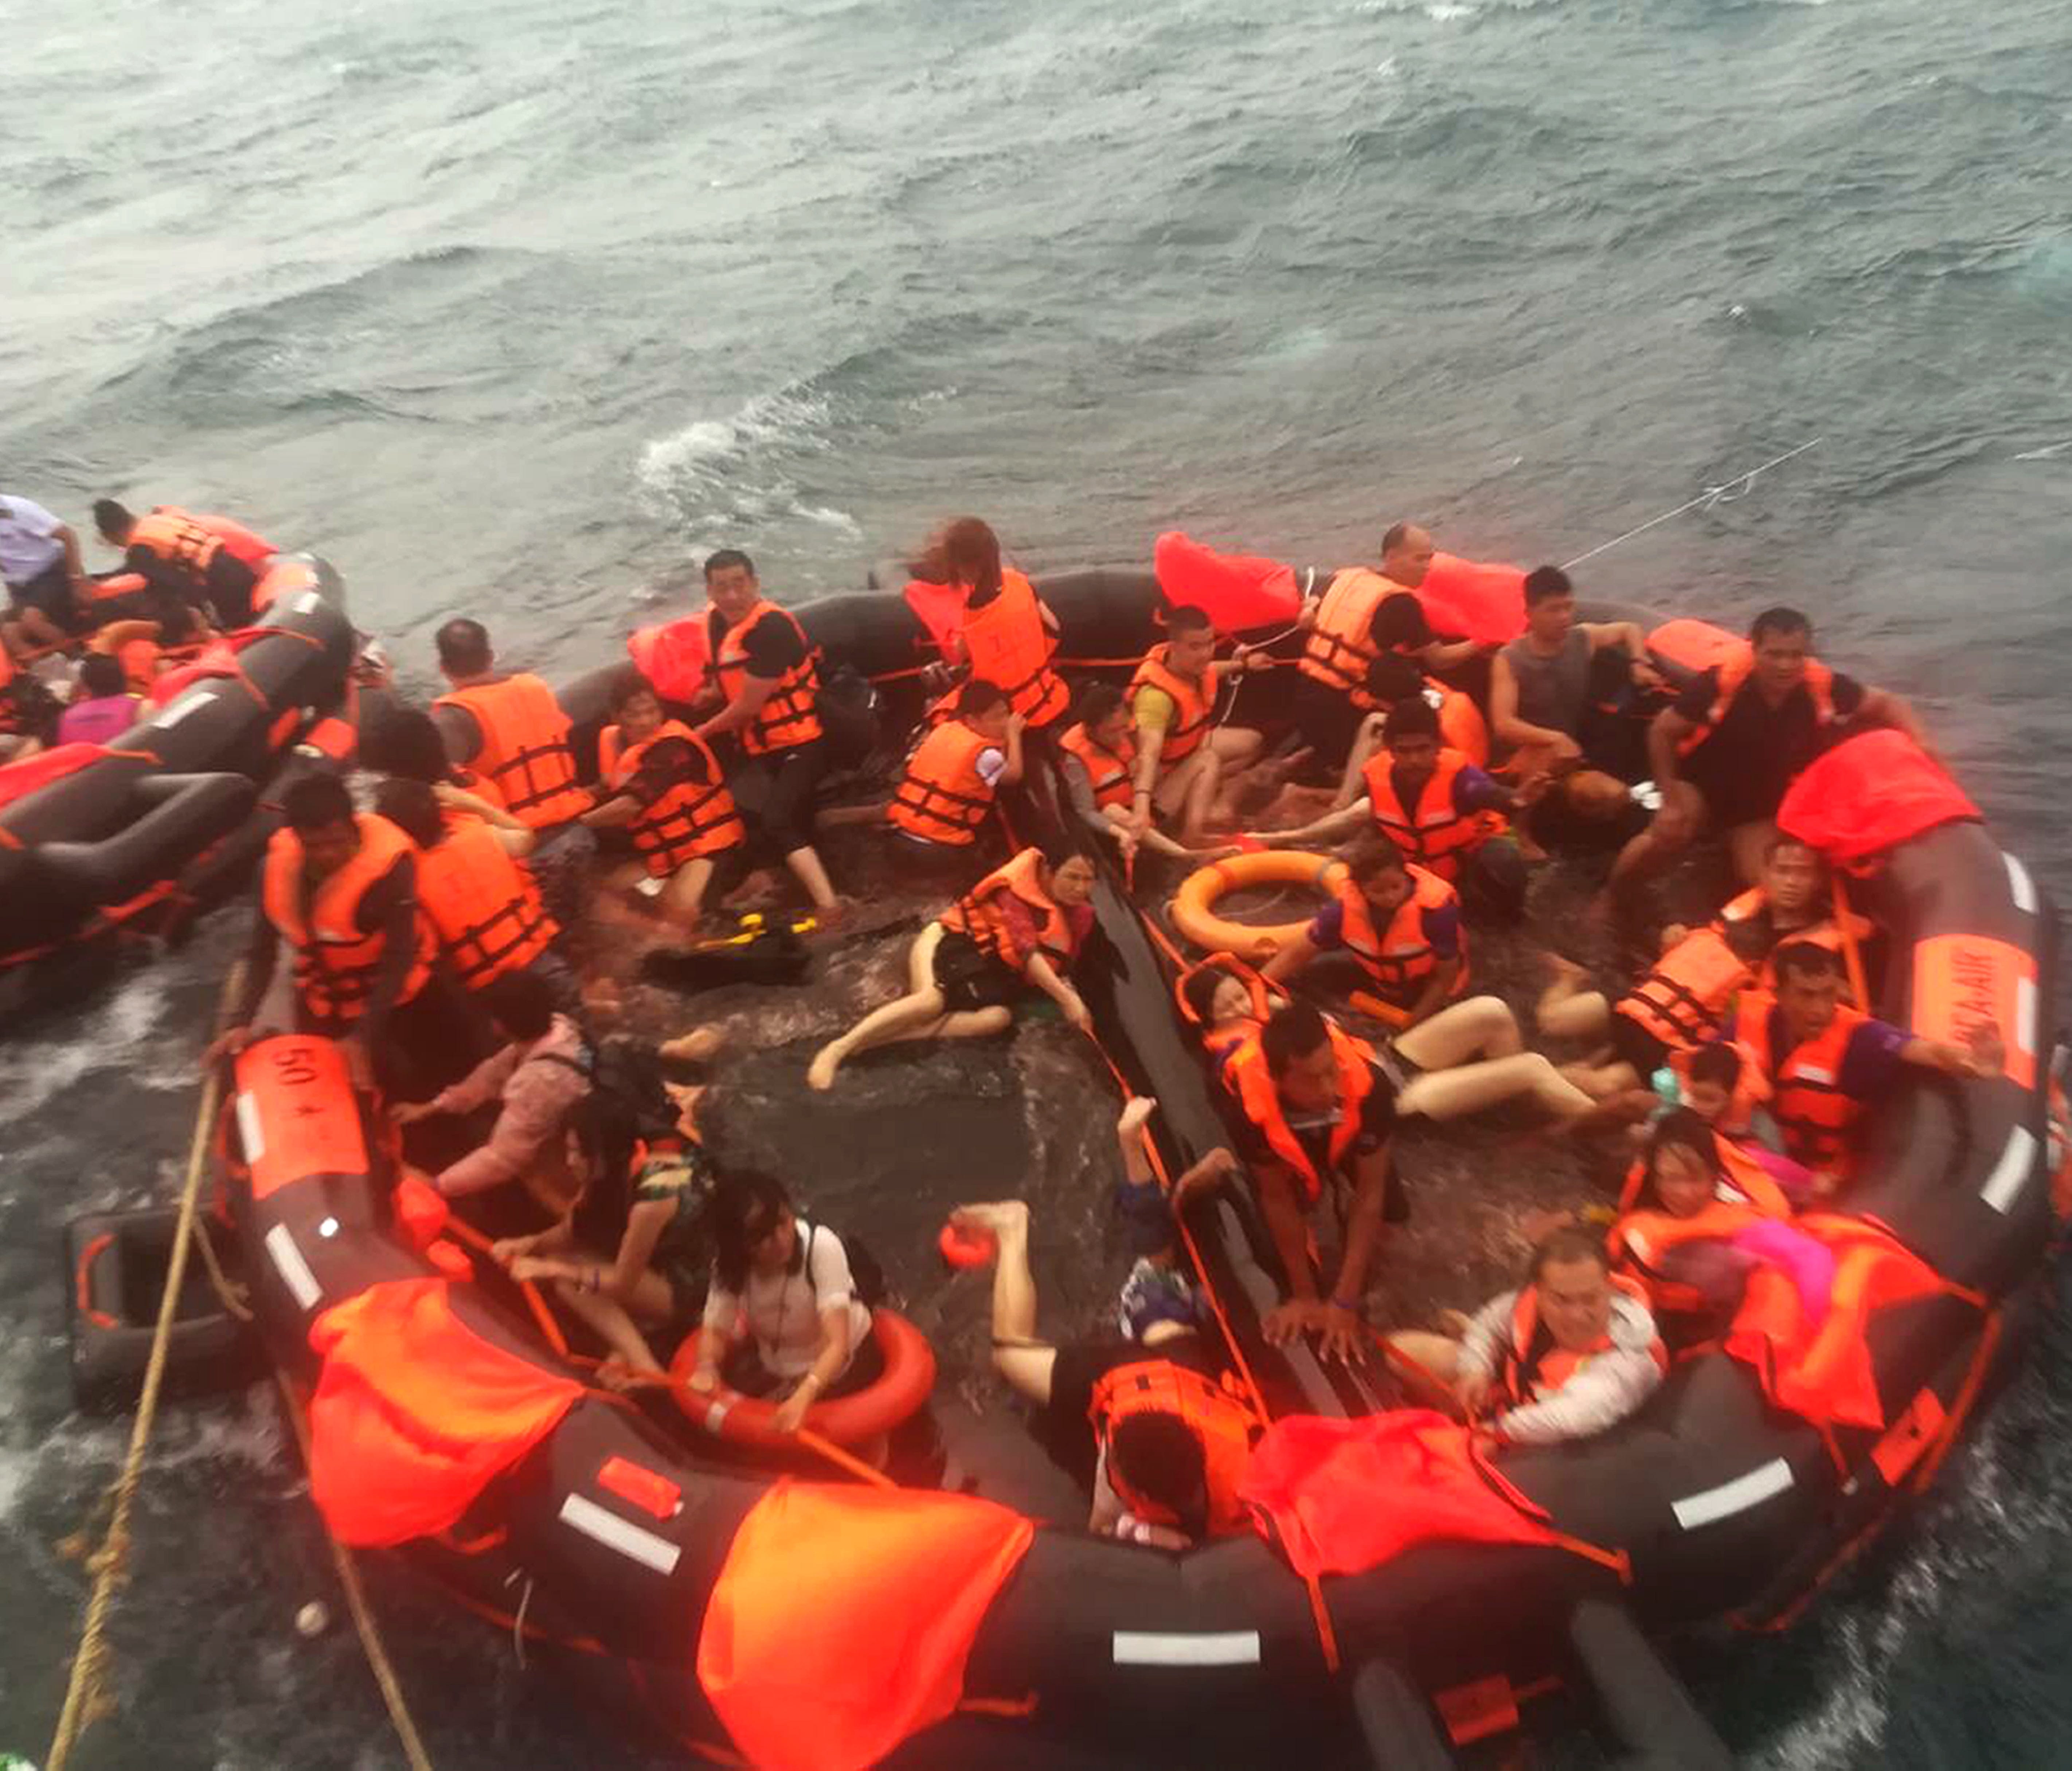 A handout photo made available by The Royal Thai Navy Third Area Command shows rescued tourists being brought aboard a fishing boat in the seas off the coast of Phuket Island, southern Thailand, July 5, 2018.